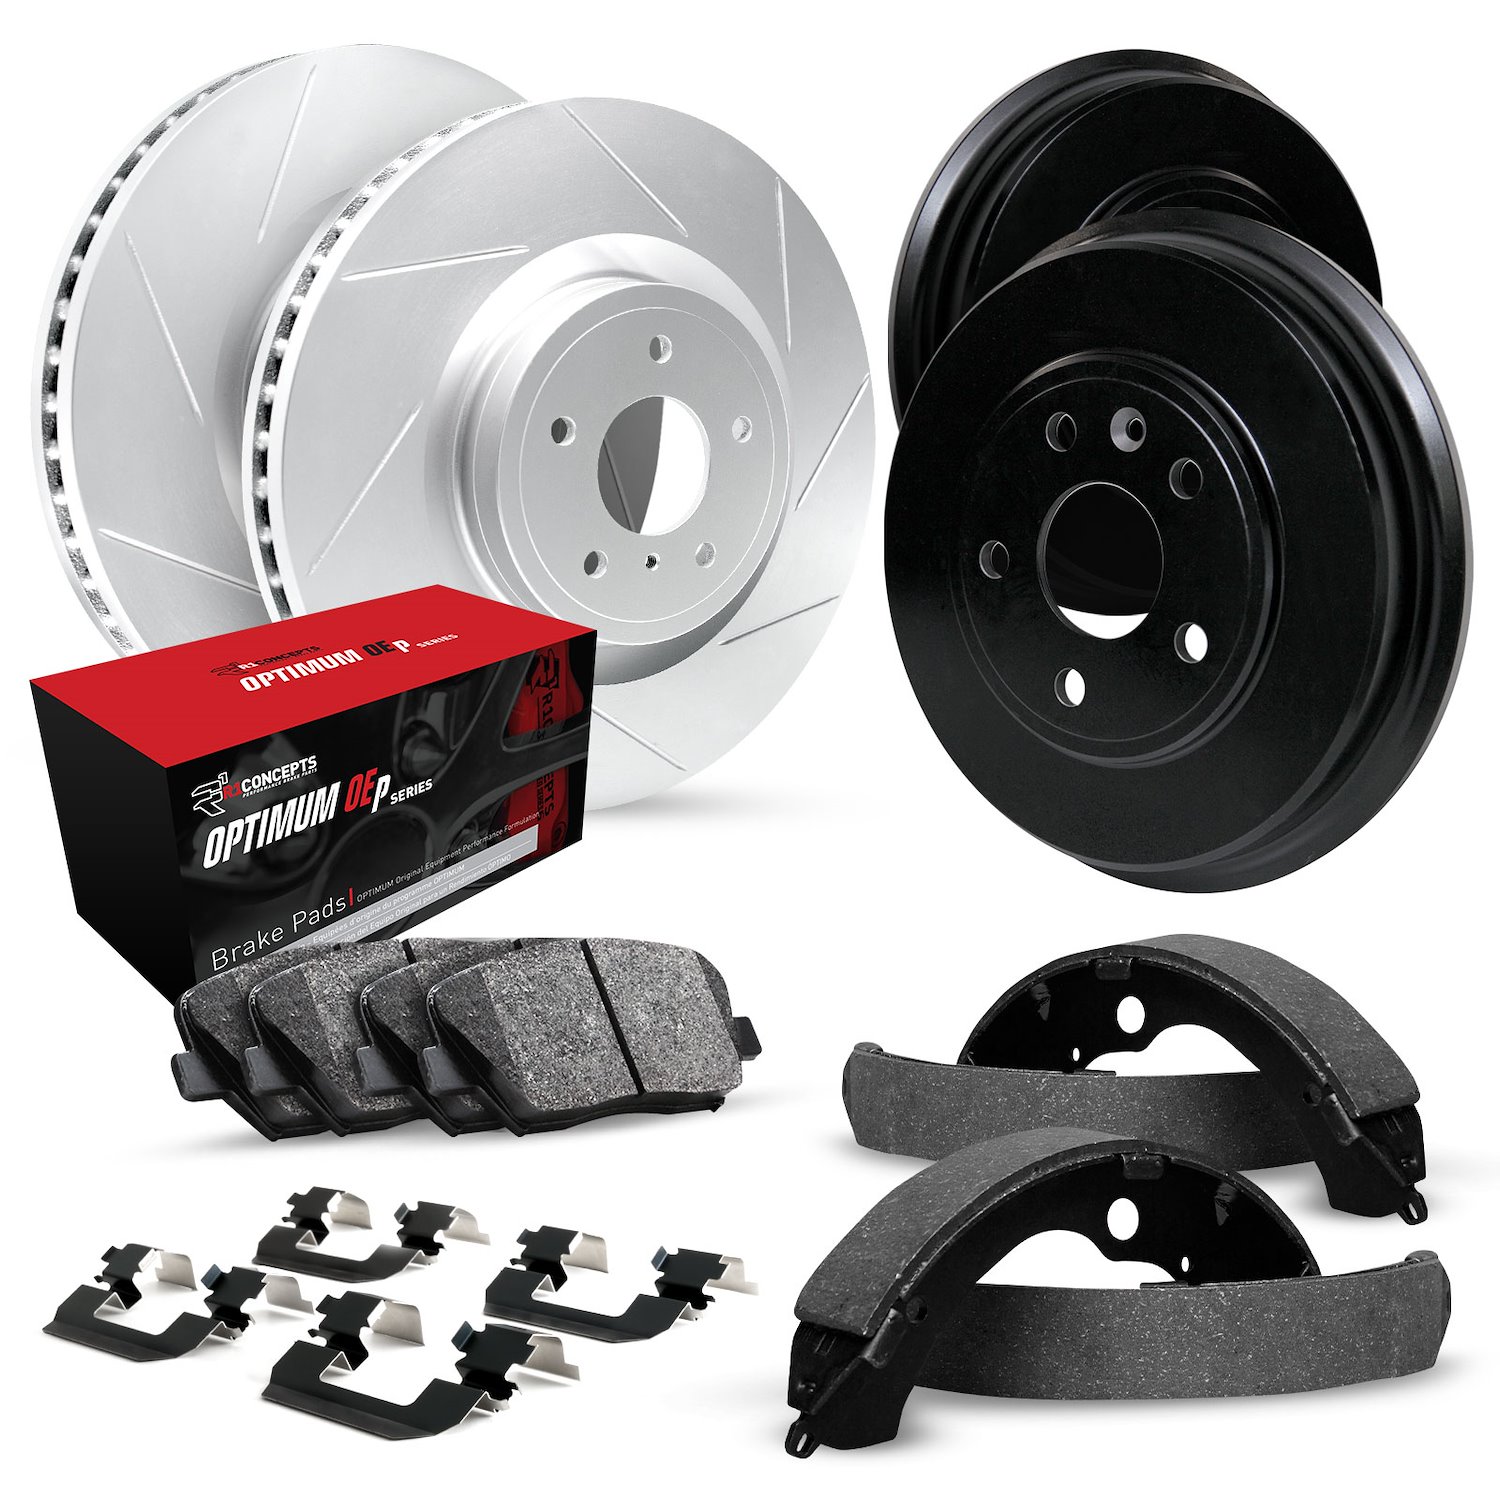 GEO-Carbon Slotted Brake Rotor & Drum Set w/Optimum OE Pads, Shoes, & Hardware, 1969-1974 GM, Position: Front & Rear